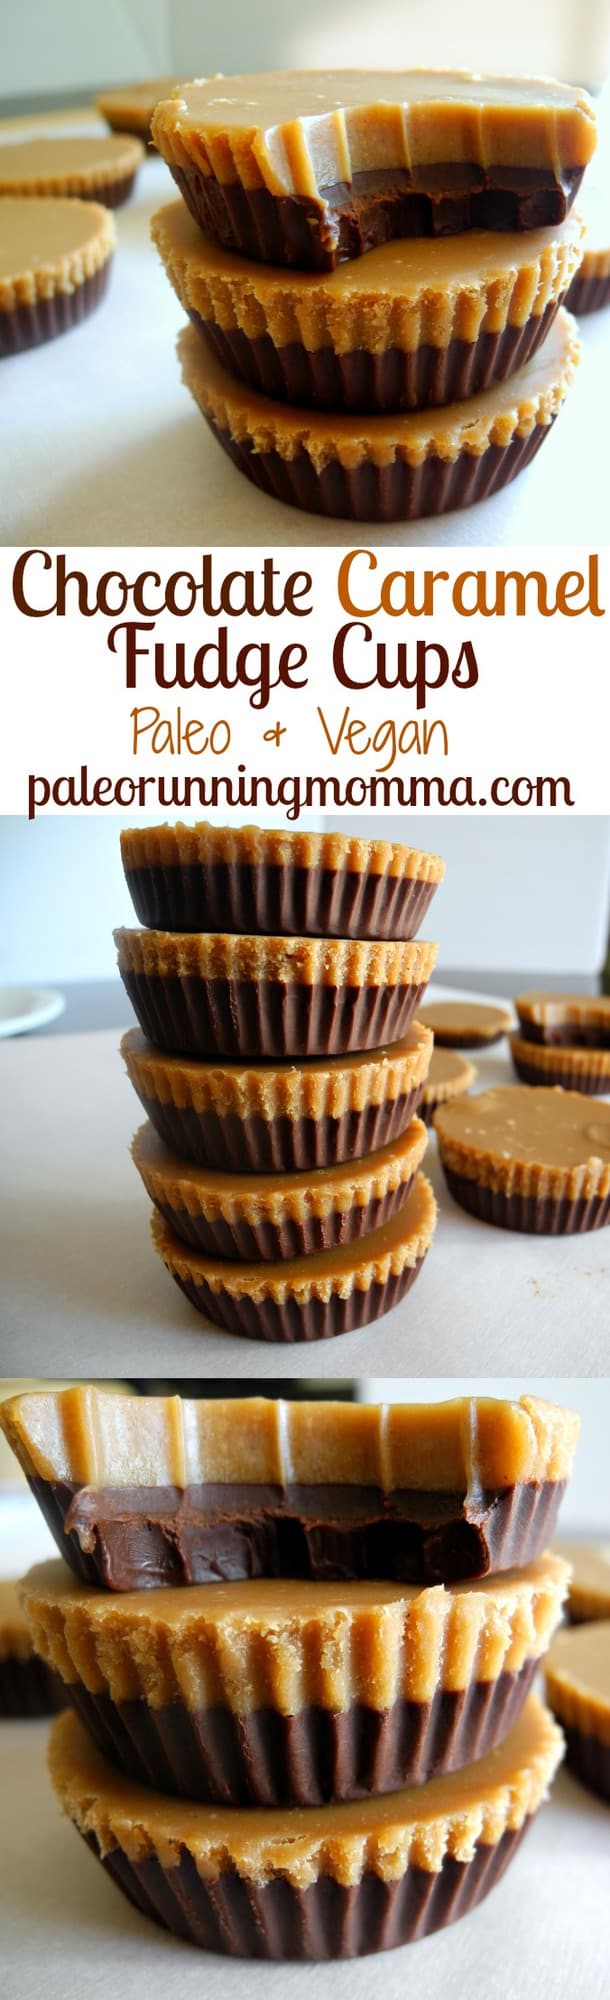 Paleo, vegan, easy to make and fast! These chocolate caramel fudge cups are out of this world incredible and impossible to resist!